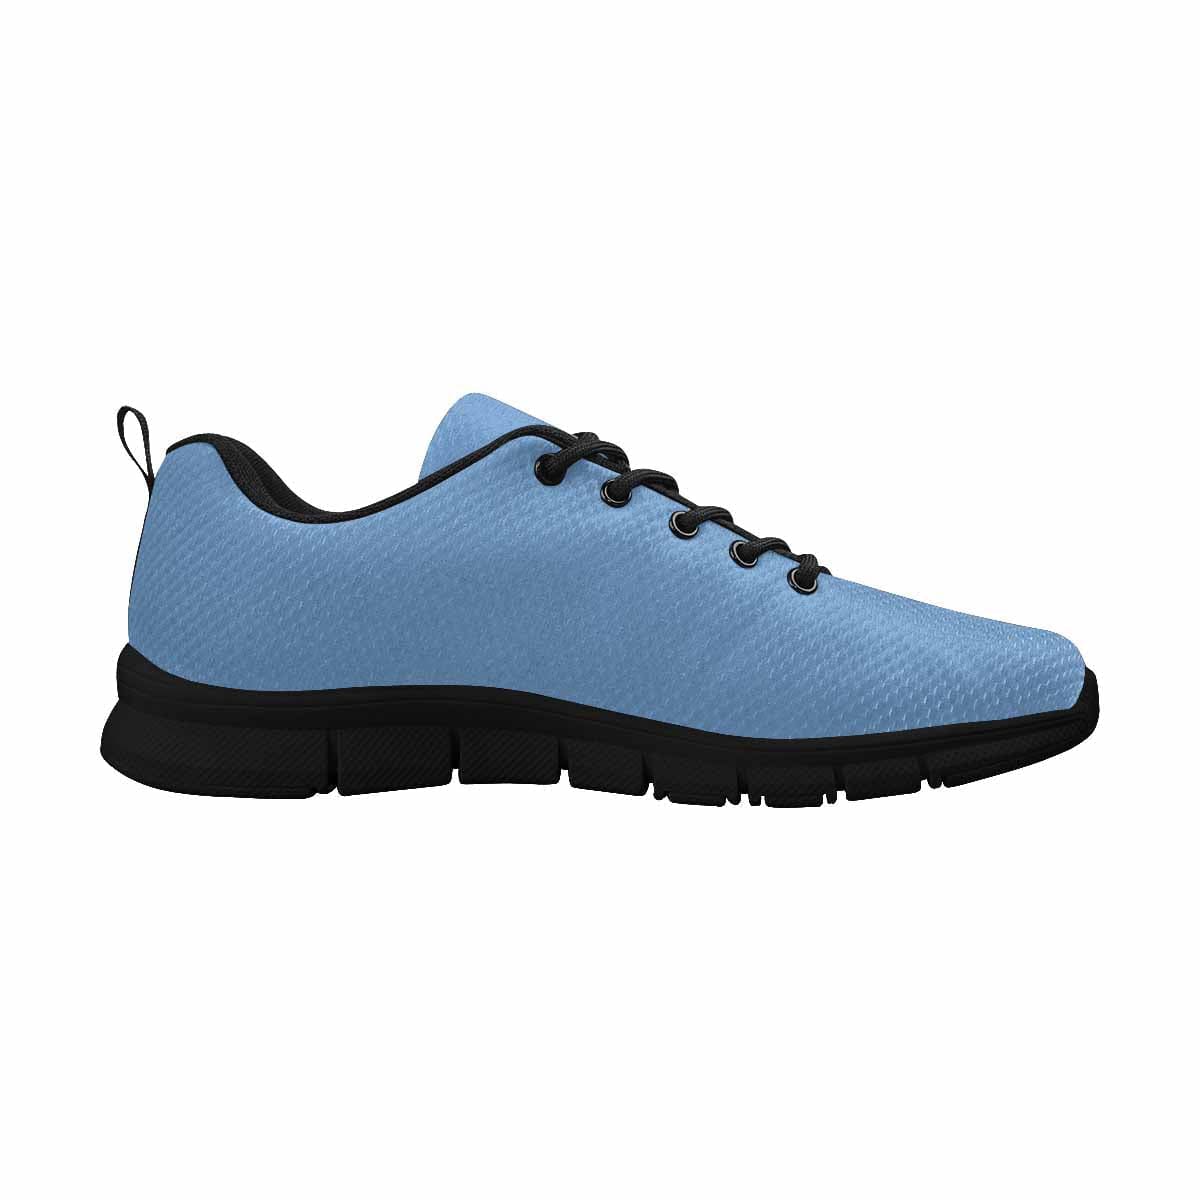 Sneakers For Men Blue Gray - Running Shoes - Mens | Sneakers | Running